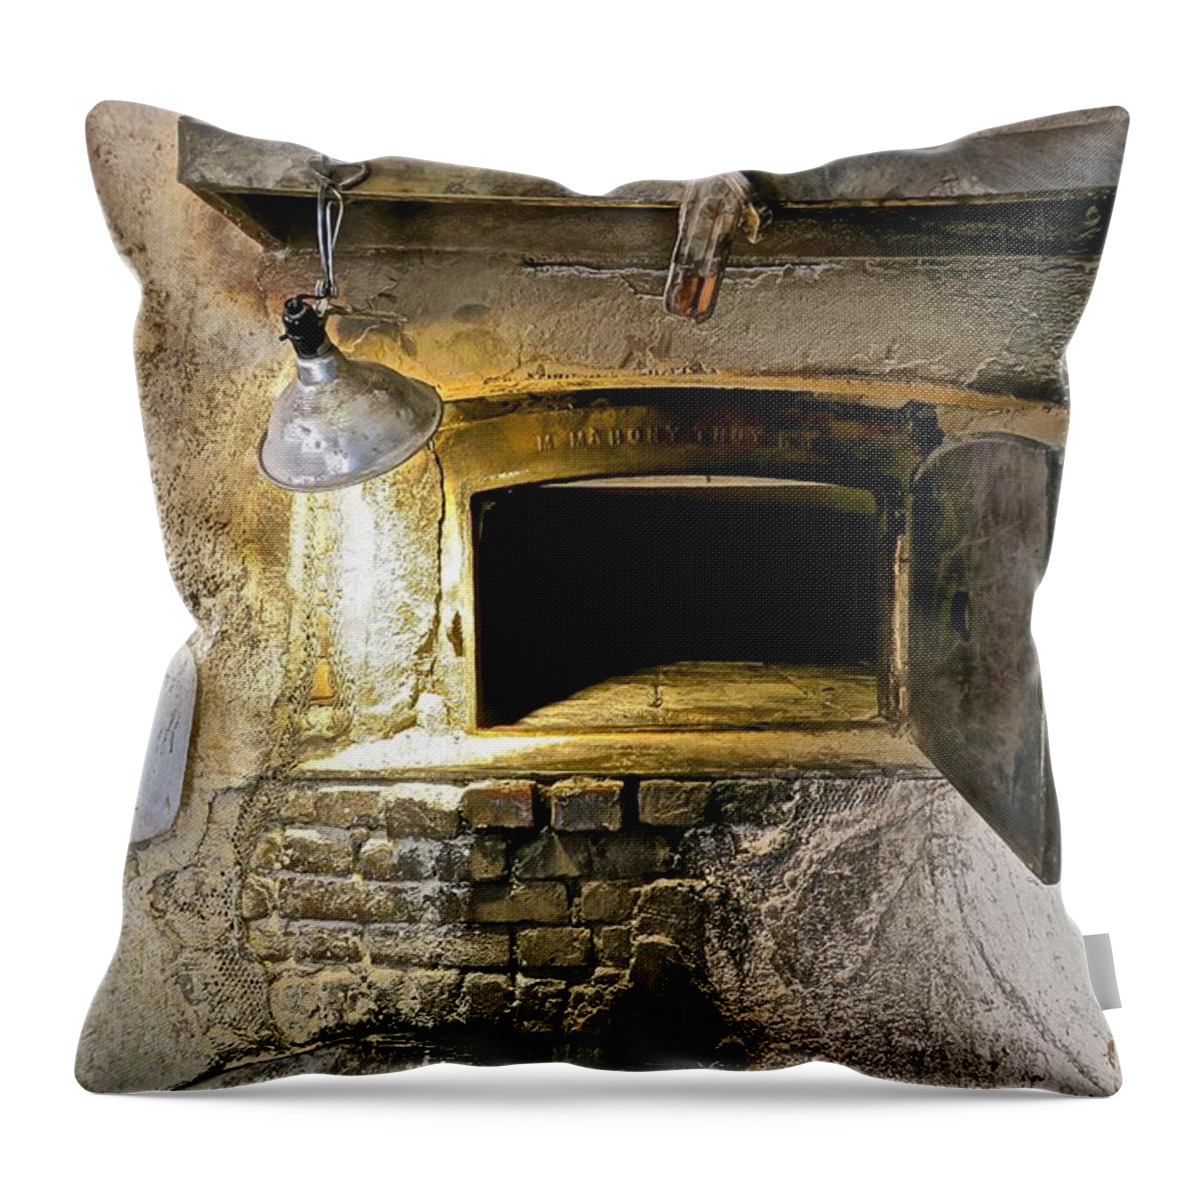 Oven Throw Pillow featuring the photograph Coal-fired Oven by Mike Reilly